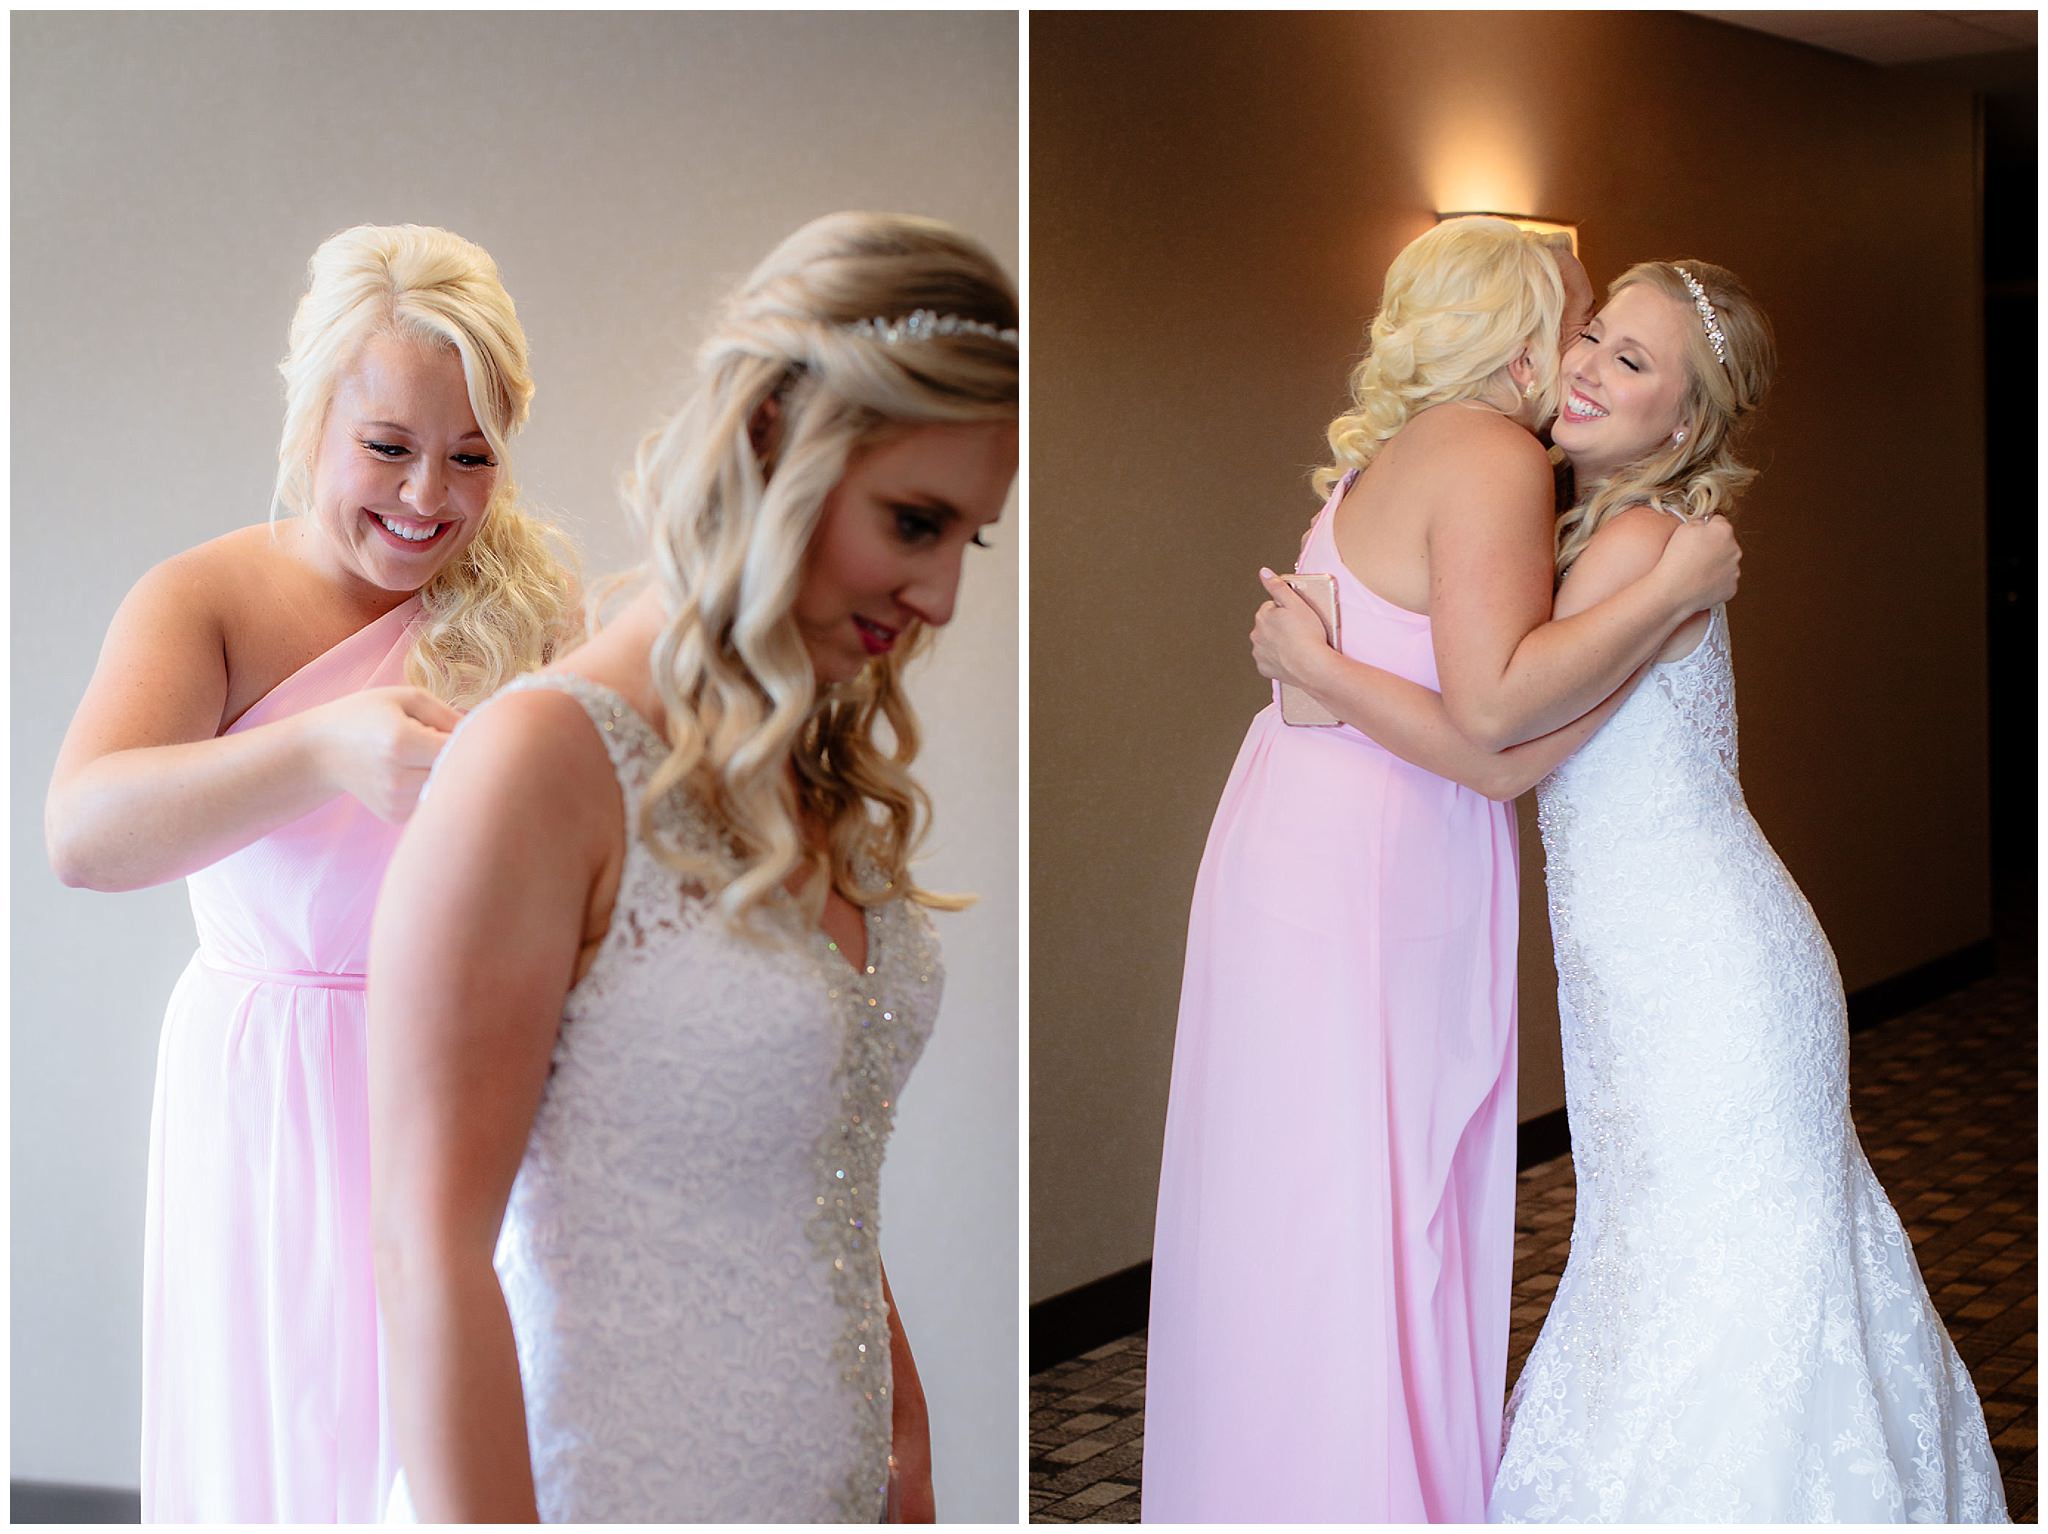 Maid of honor hugs bride before a Duquesne University wedding ceremony